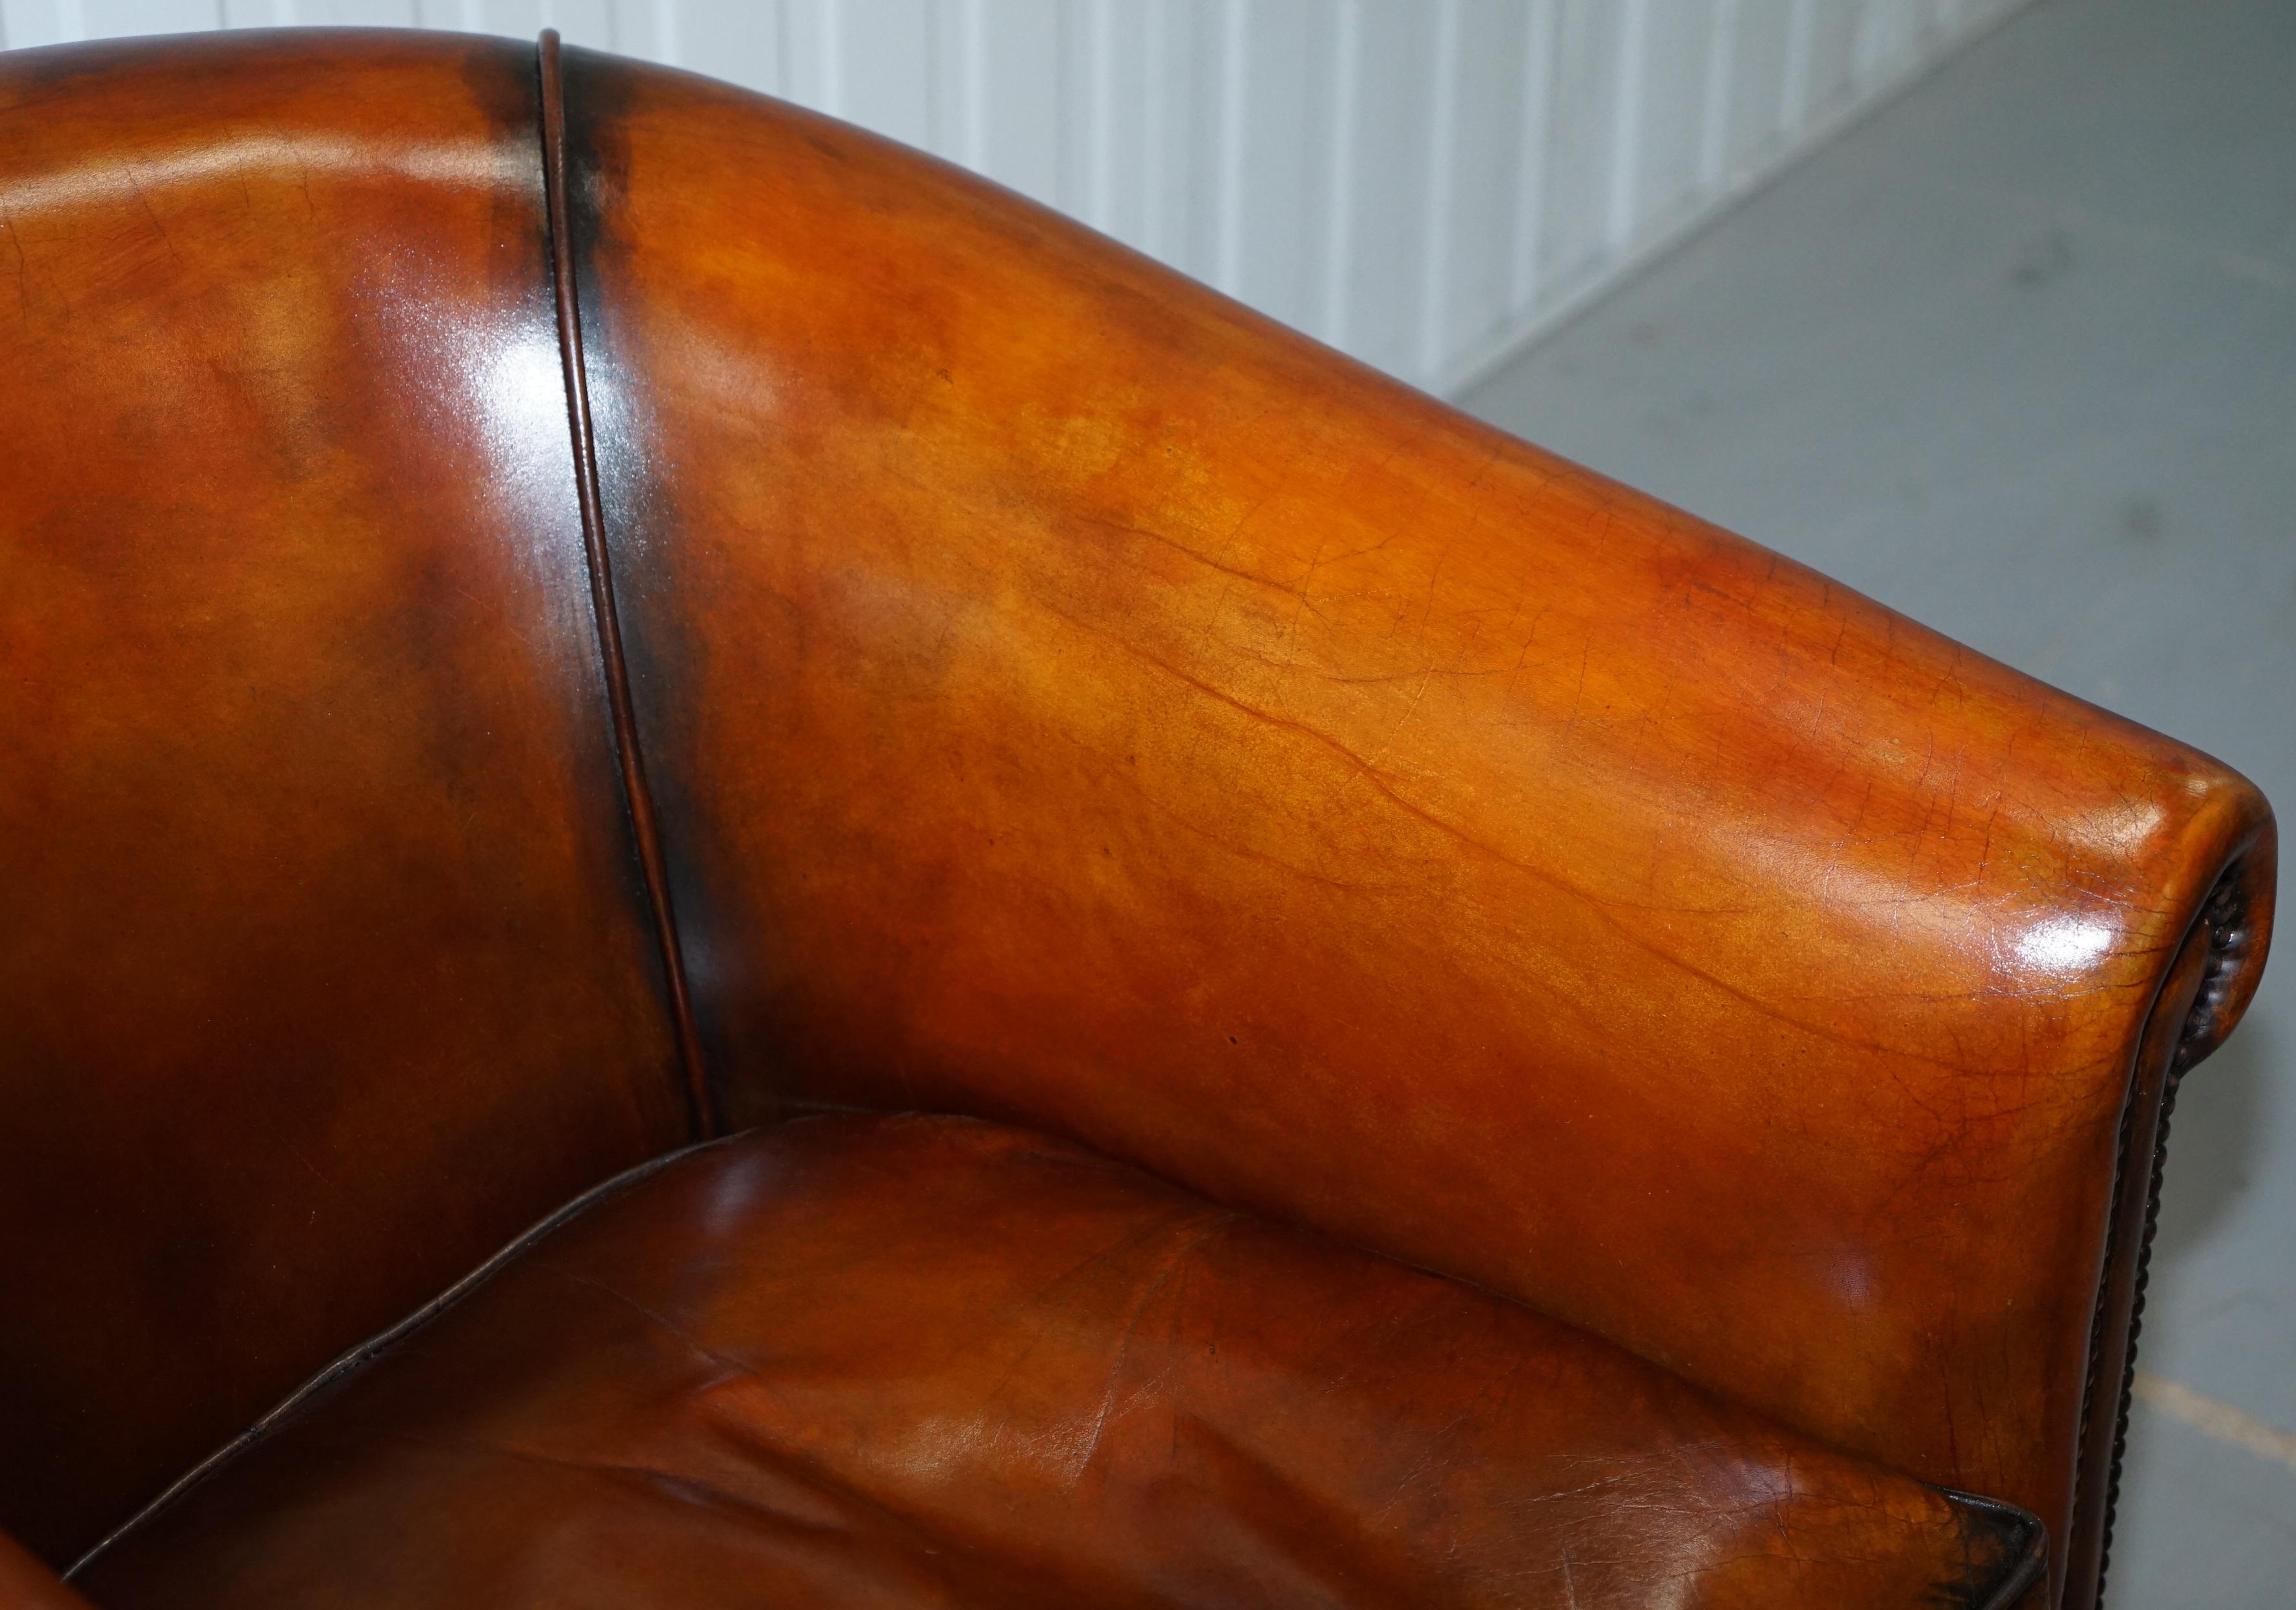 Modern James Bond 007 Armchair from Spectre Leather Chairs of Bath Fully Restored